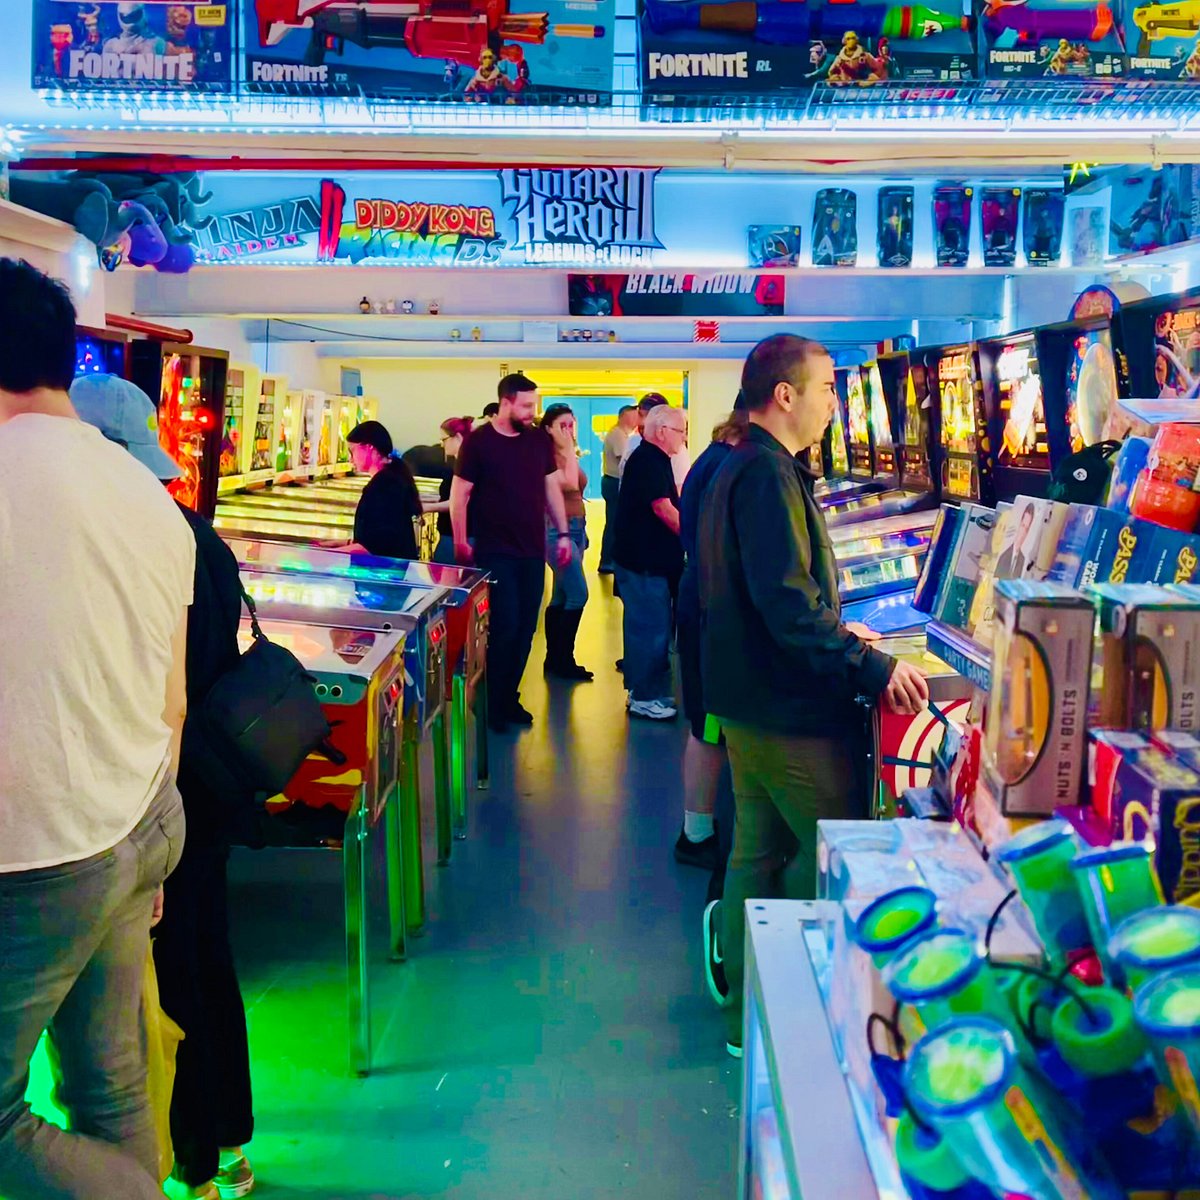 Electromagnetic Pinball Museum and Restoration – Blackstone Valley